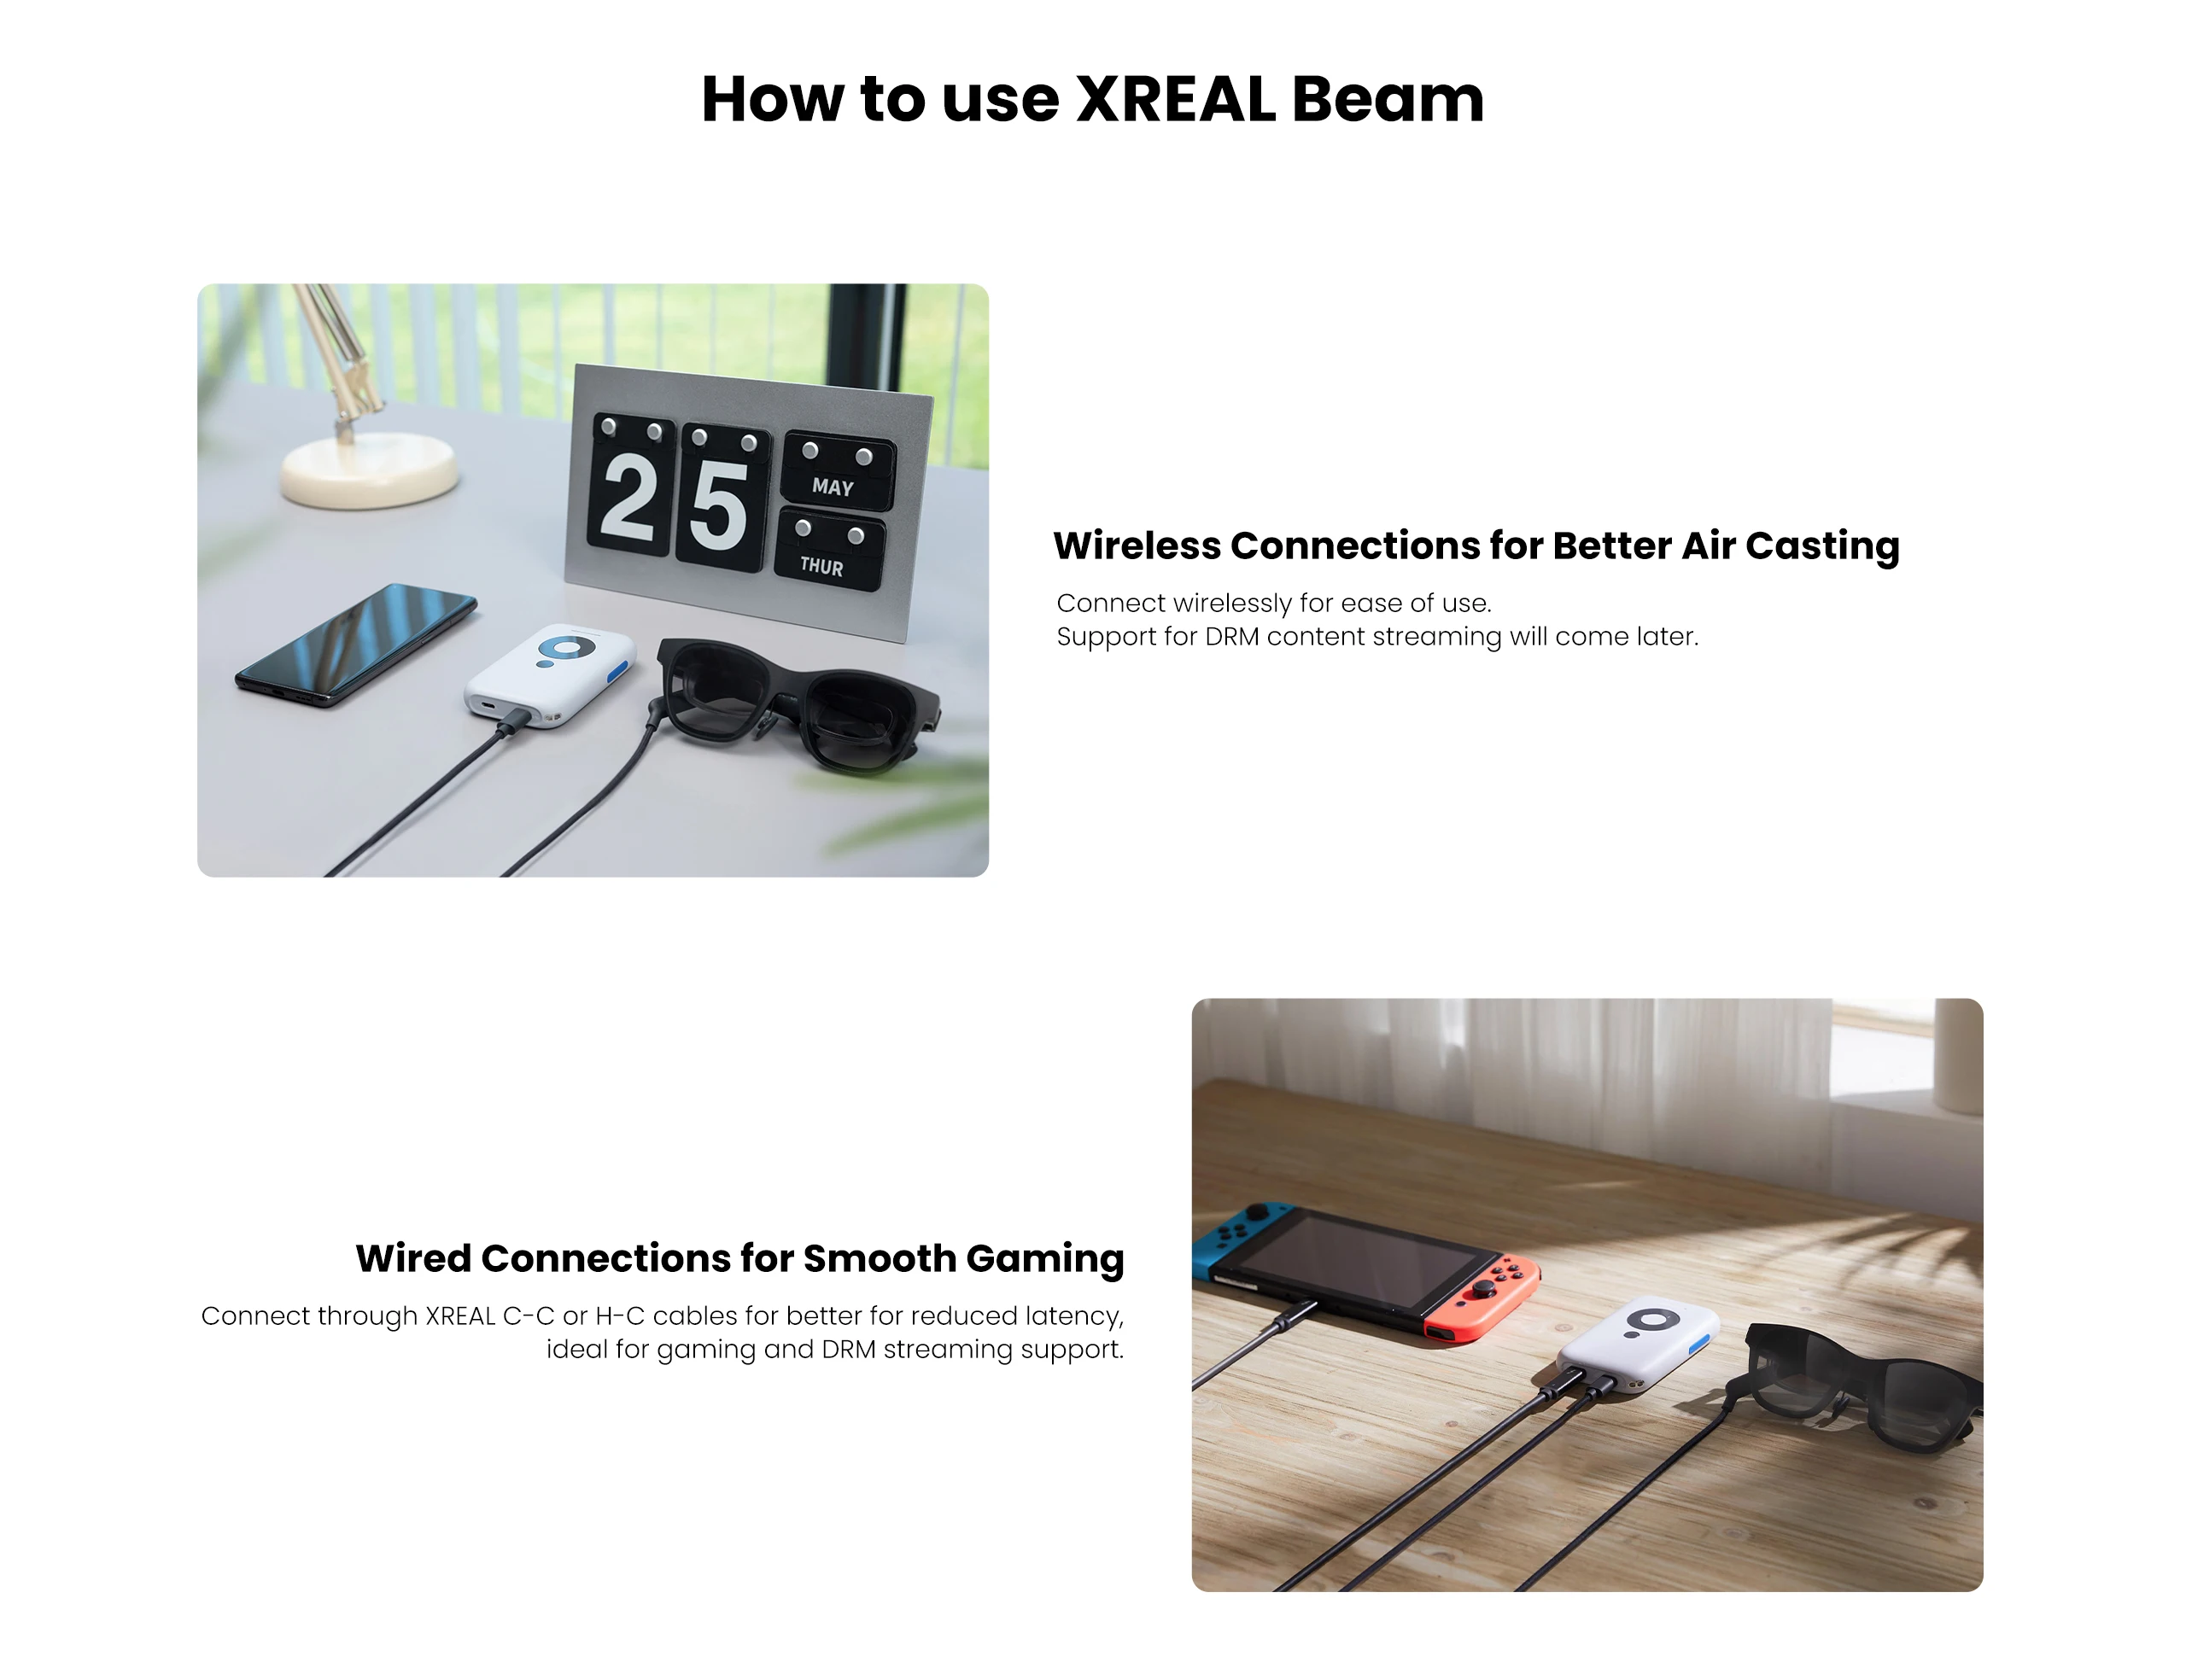 XREAL (Nreal) Air AR Glasses: How to Setup / Install (step by step